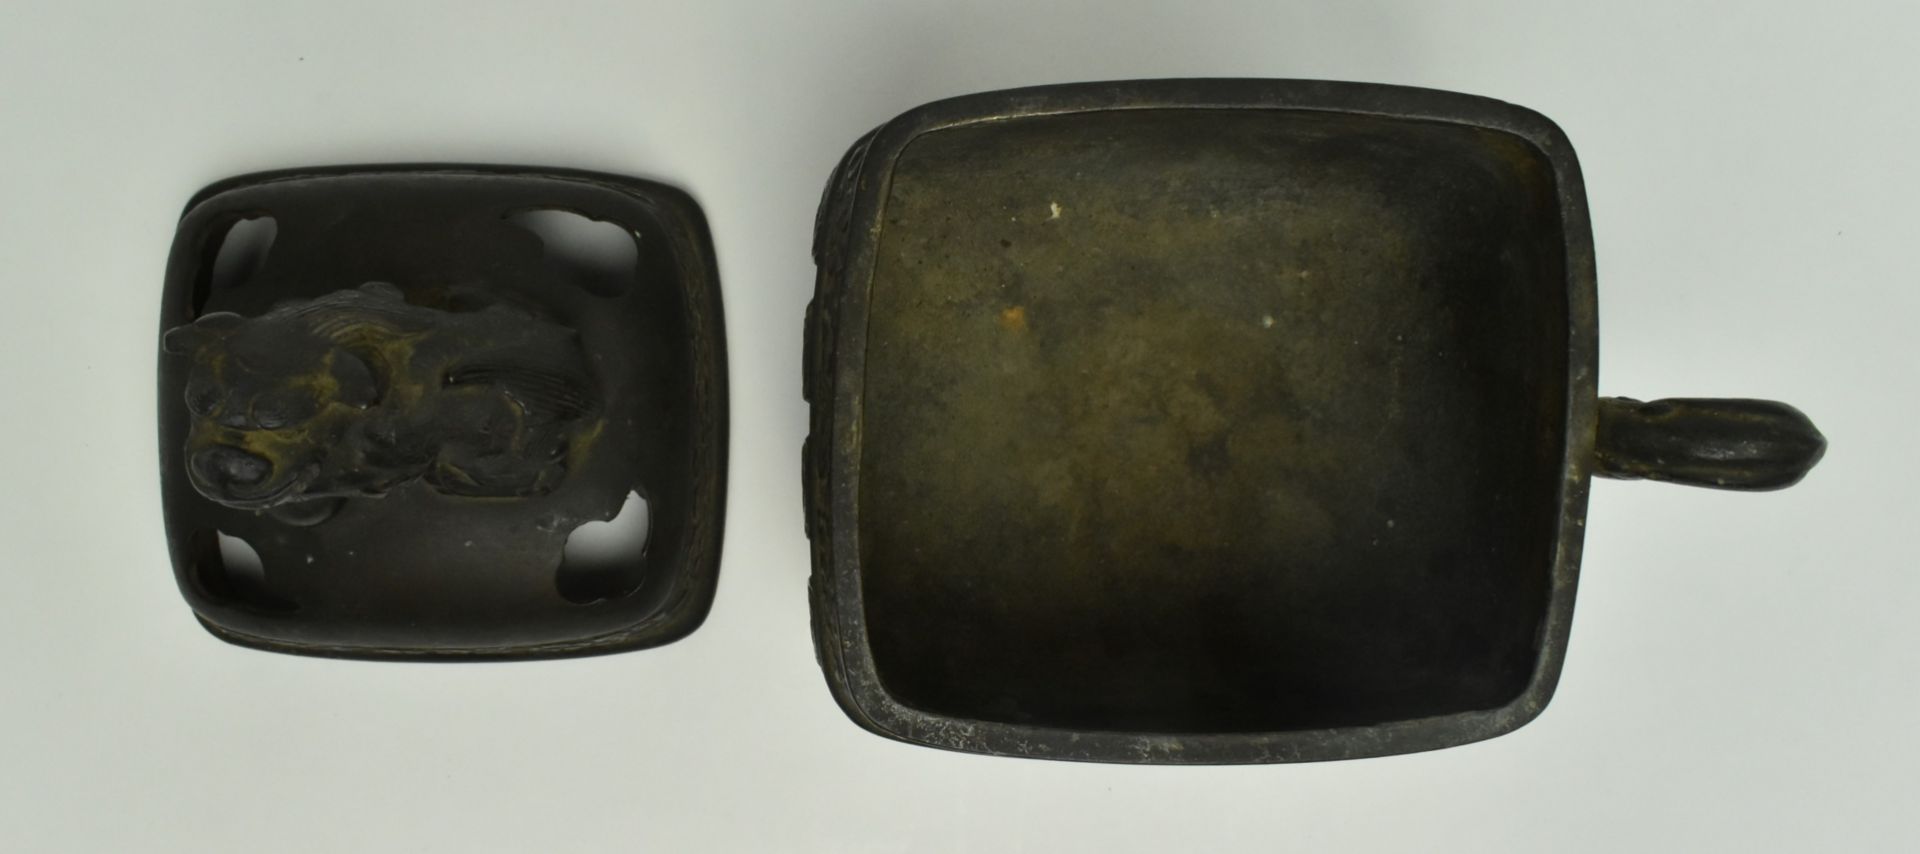 POSSIBLY MING OR LATER BRONZE CENSER COVER 铜香炉 - Image 5 of 7